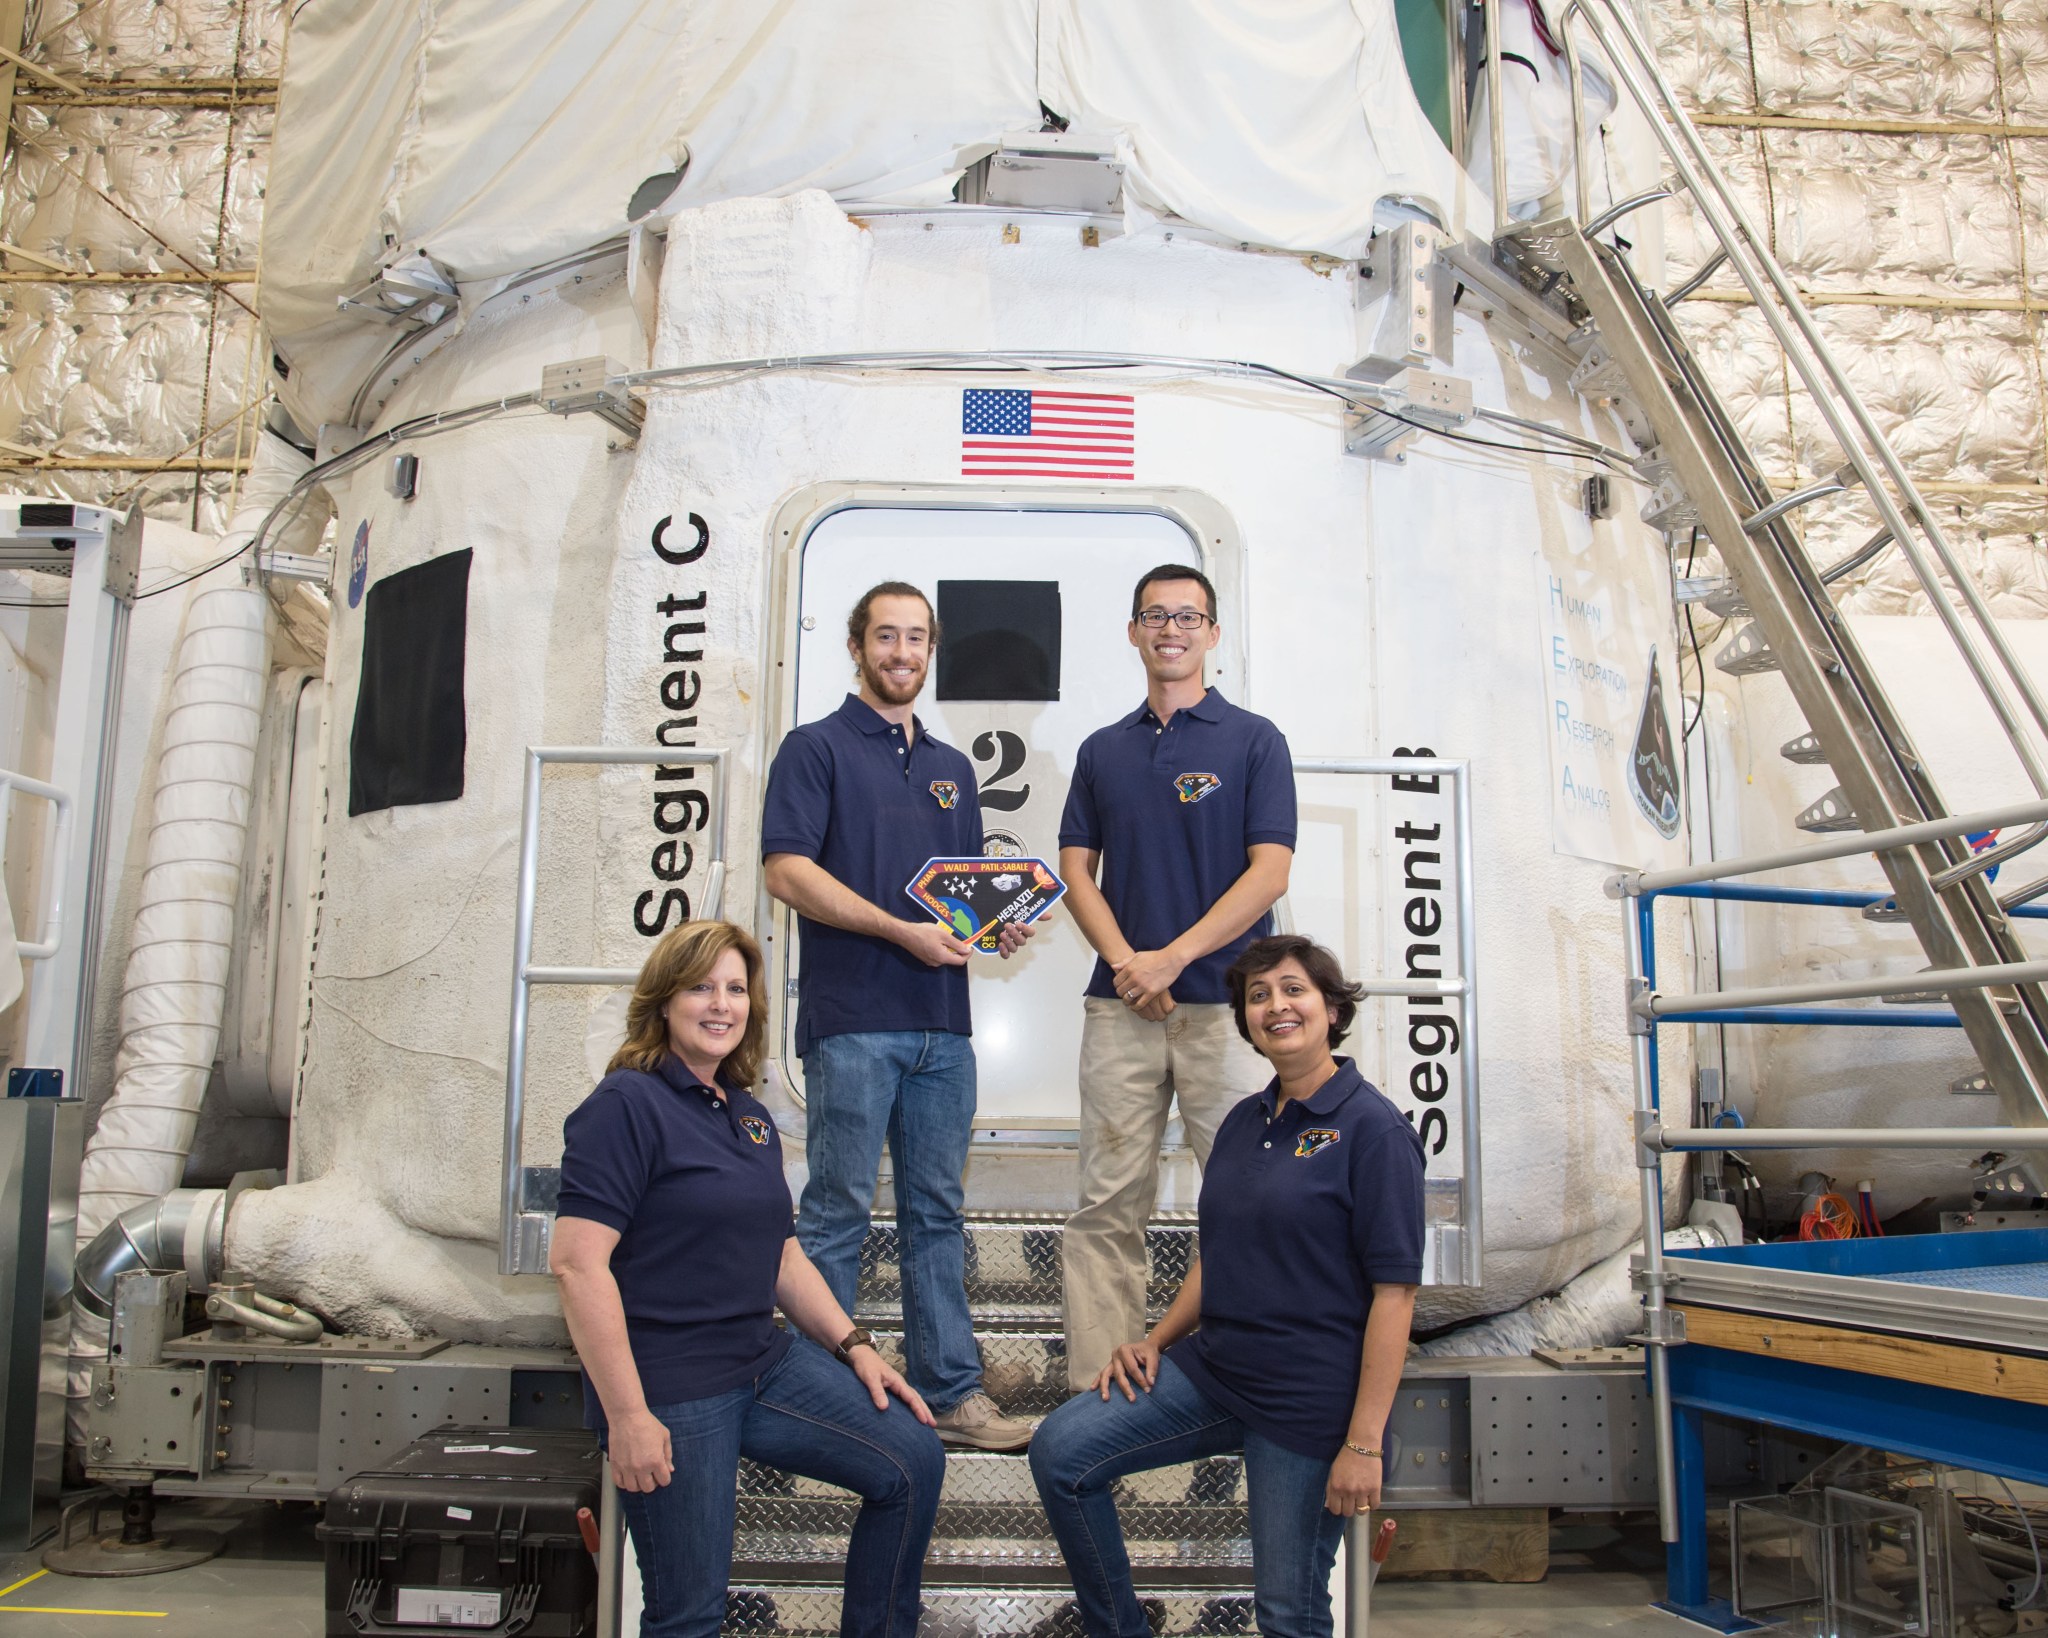 Two men and two women wearing matching blue polo shirts stand on the steps of a habitat designed to simulate a spacecraft flying to Mars.